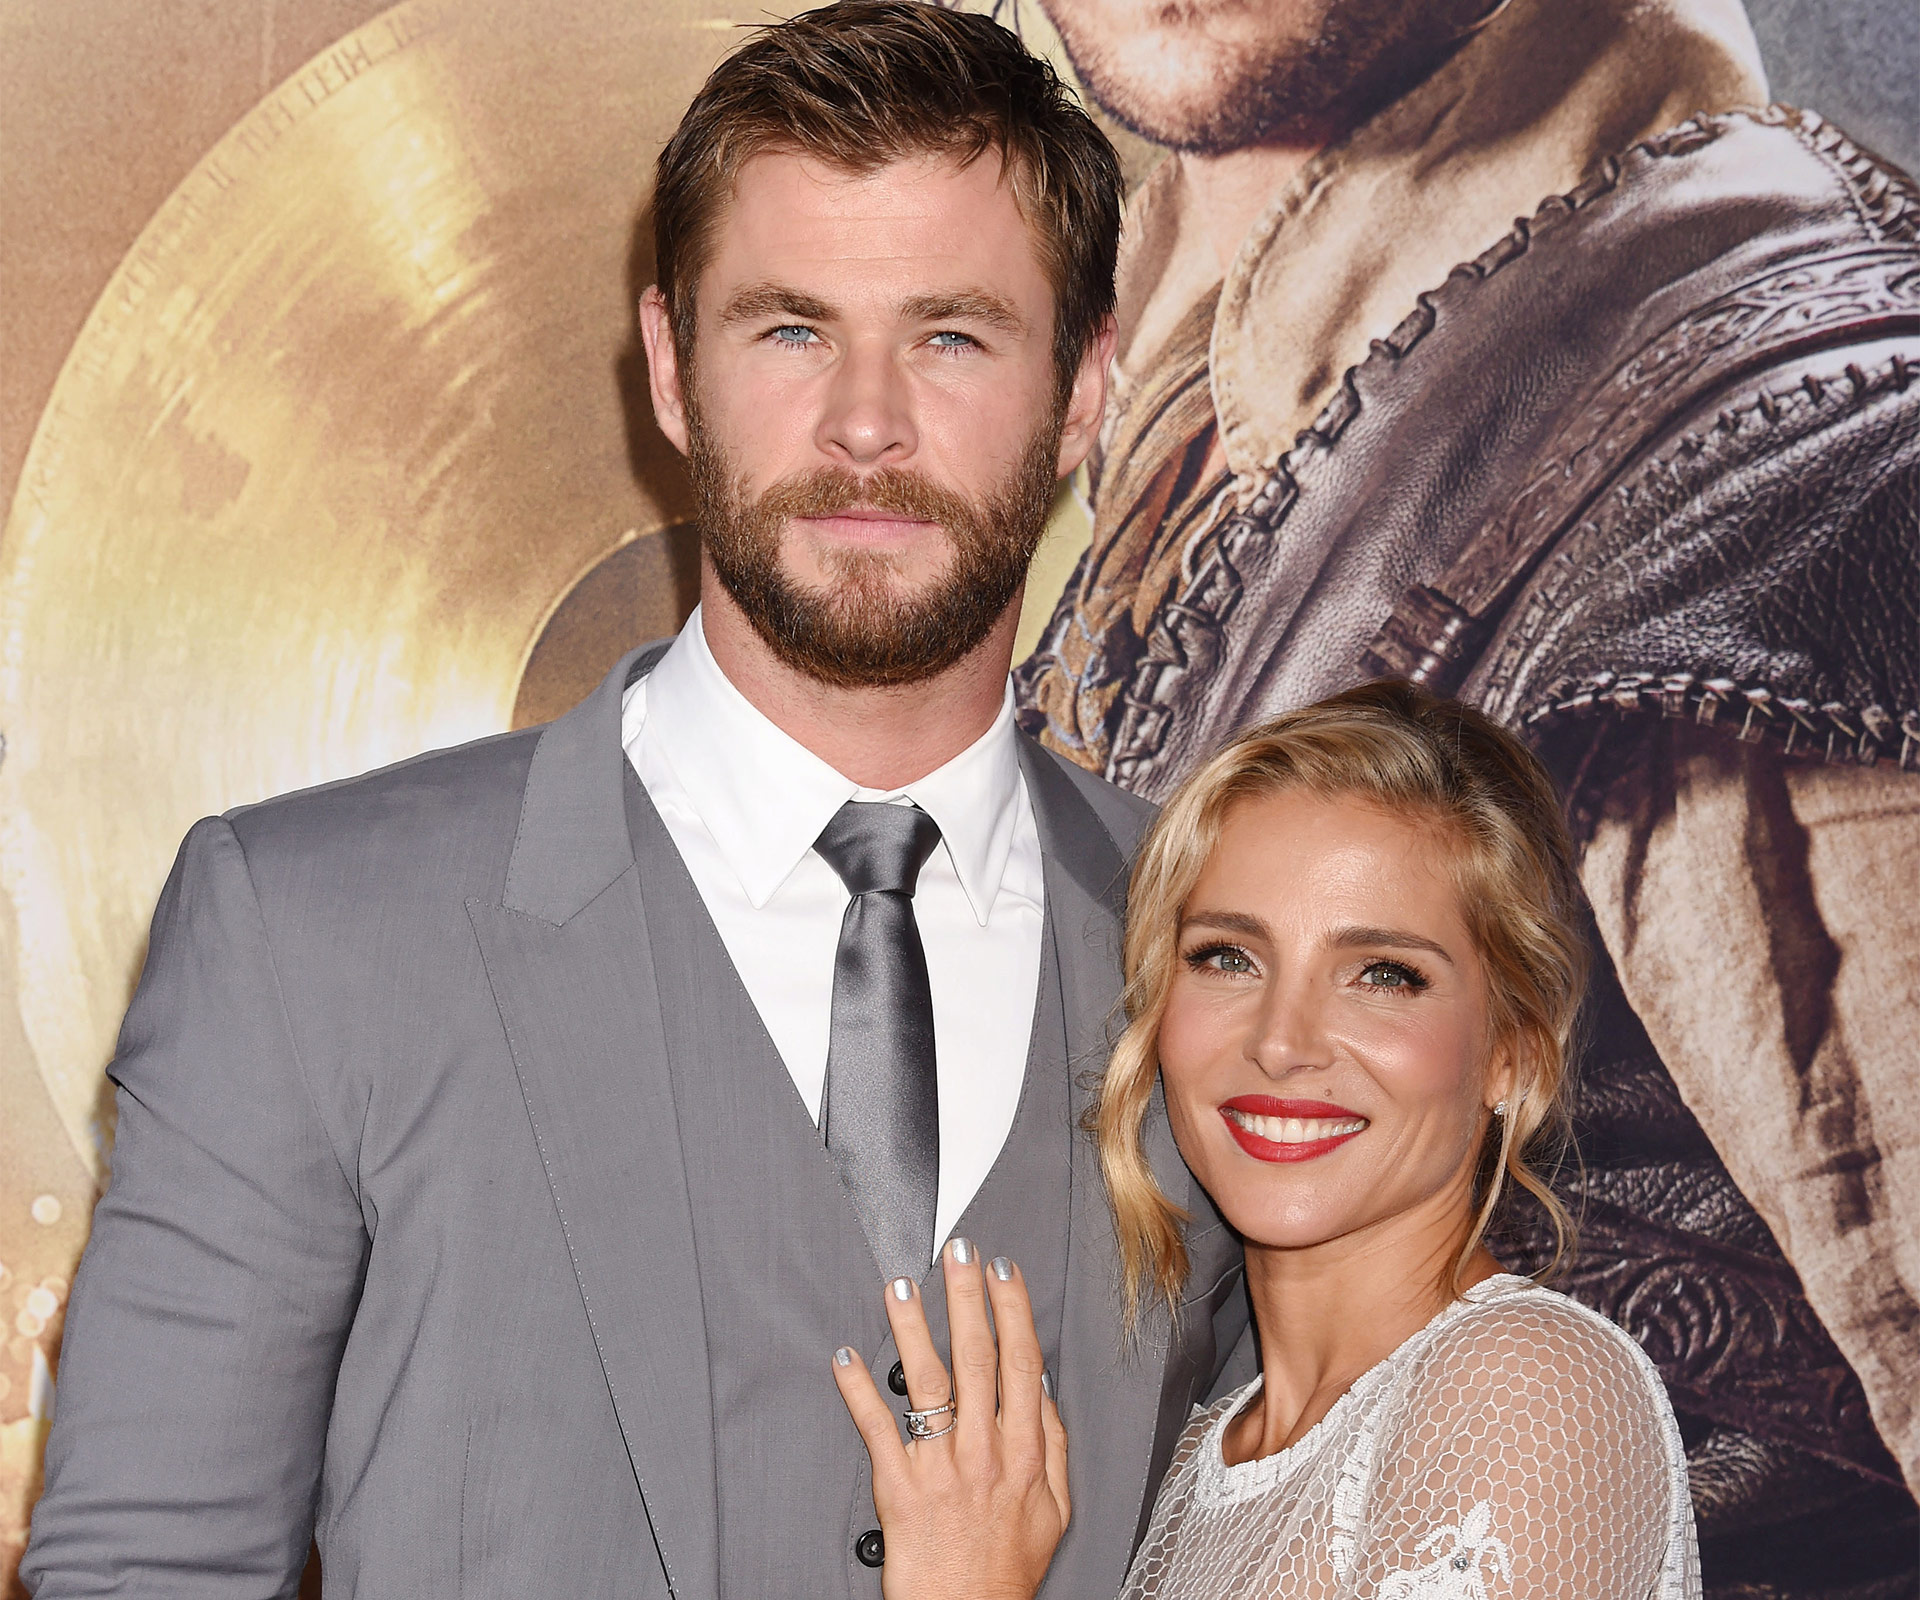 Chris Hemsworth admits his career has put a strain on his marriage